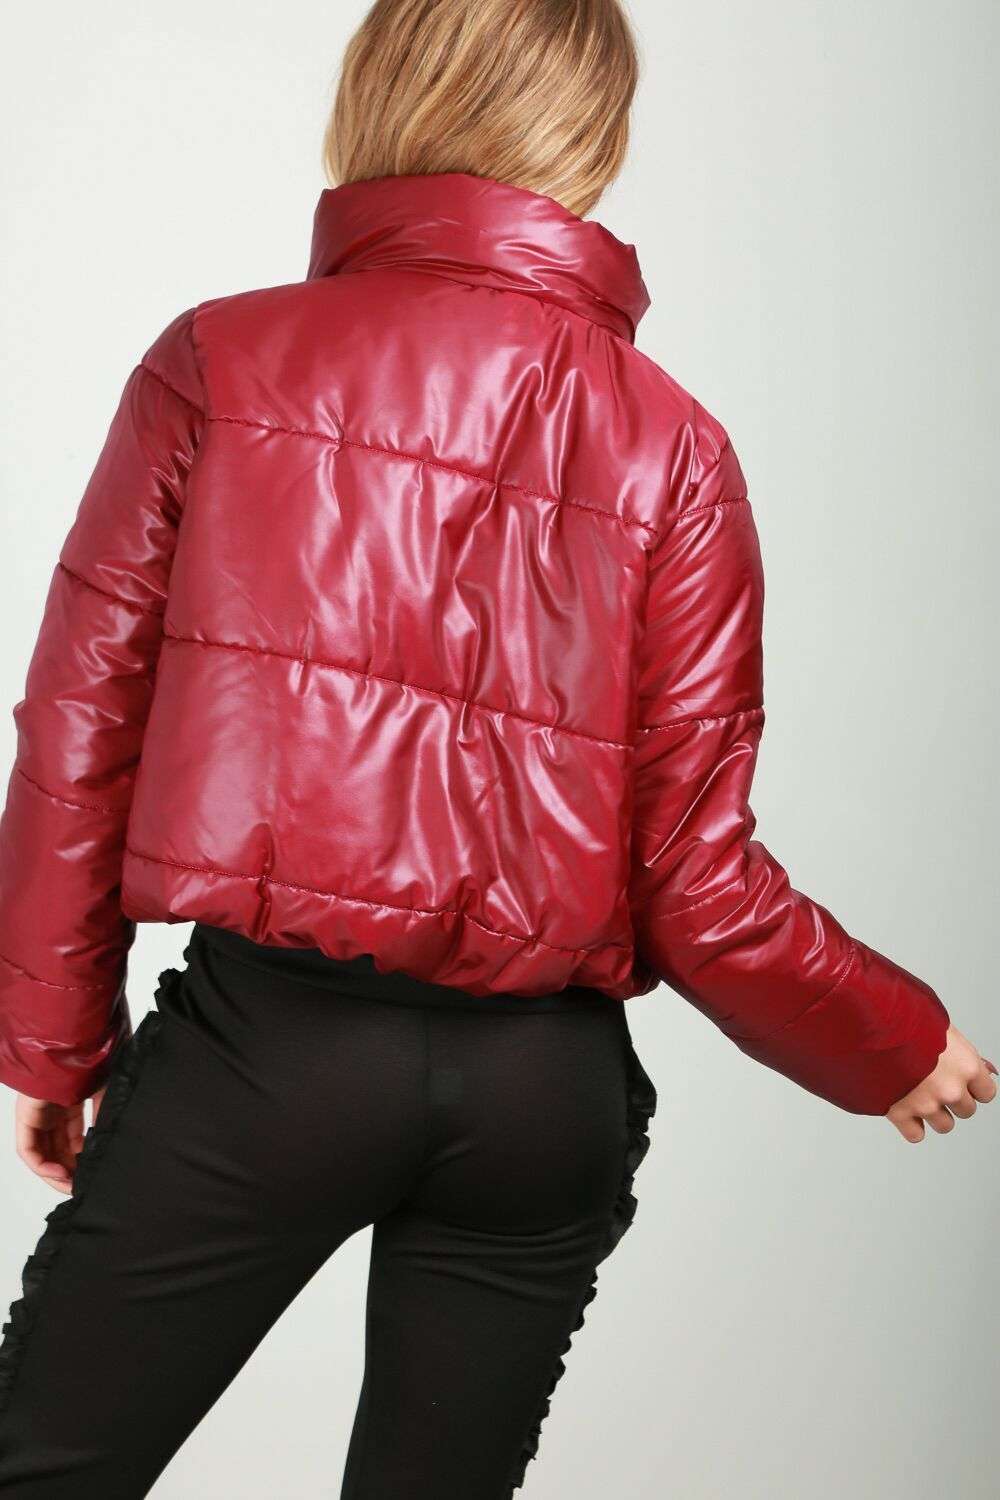 Black Cropped High Shine Quilted Puffer Jacket - bejealous-com